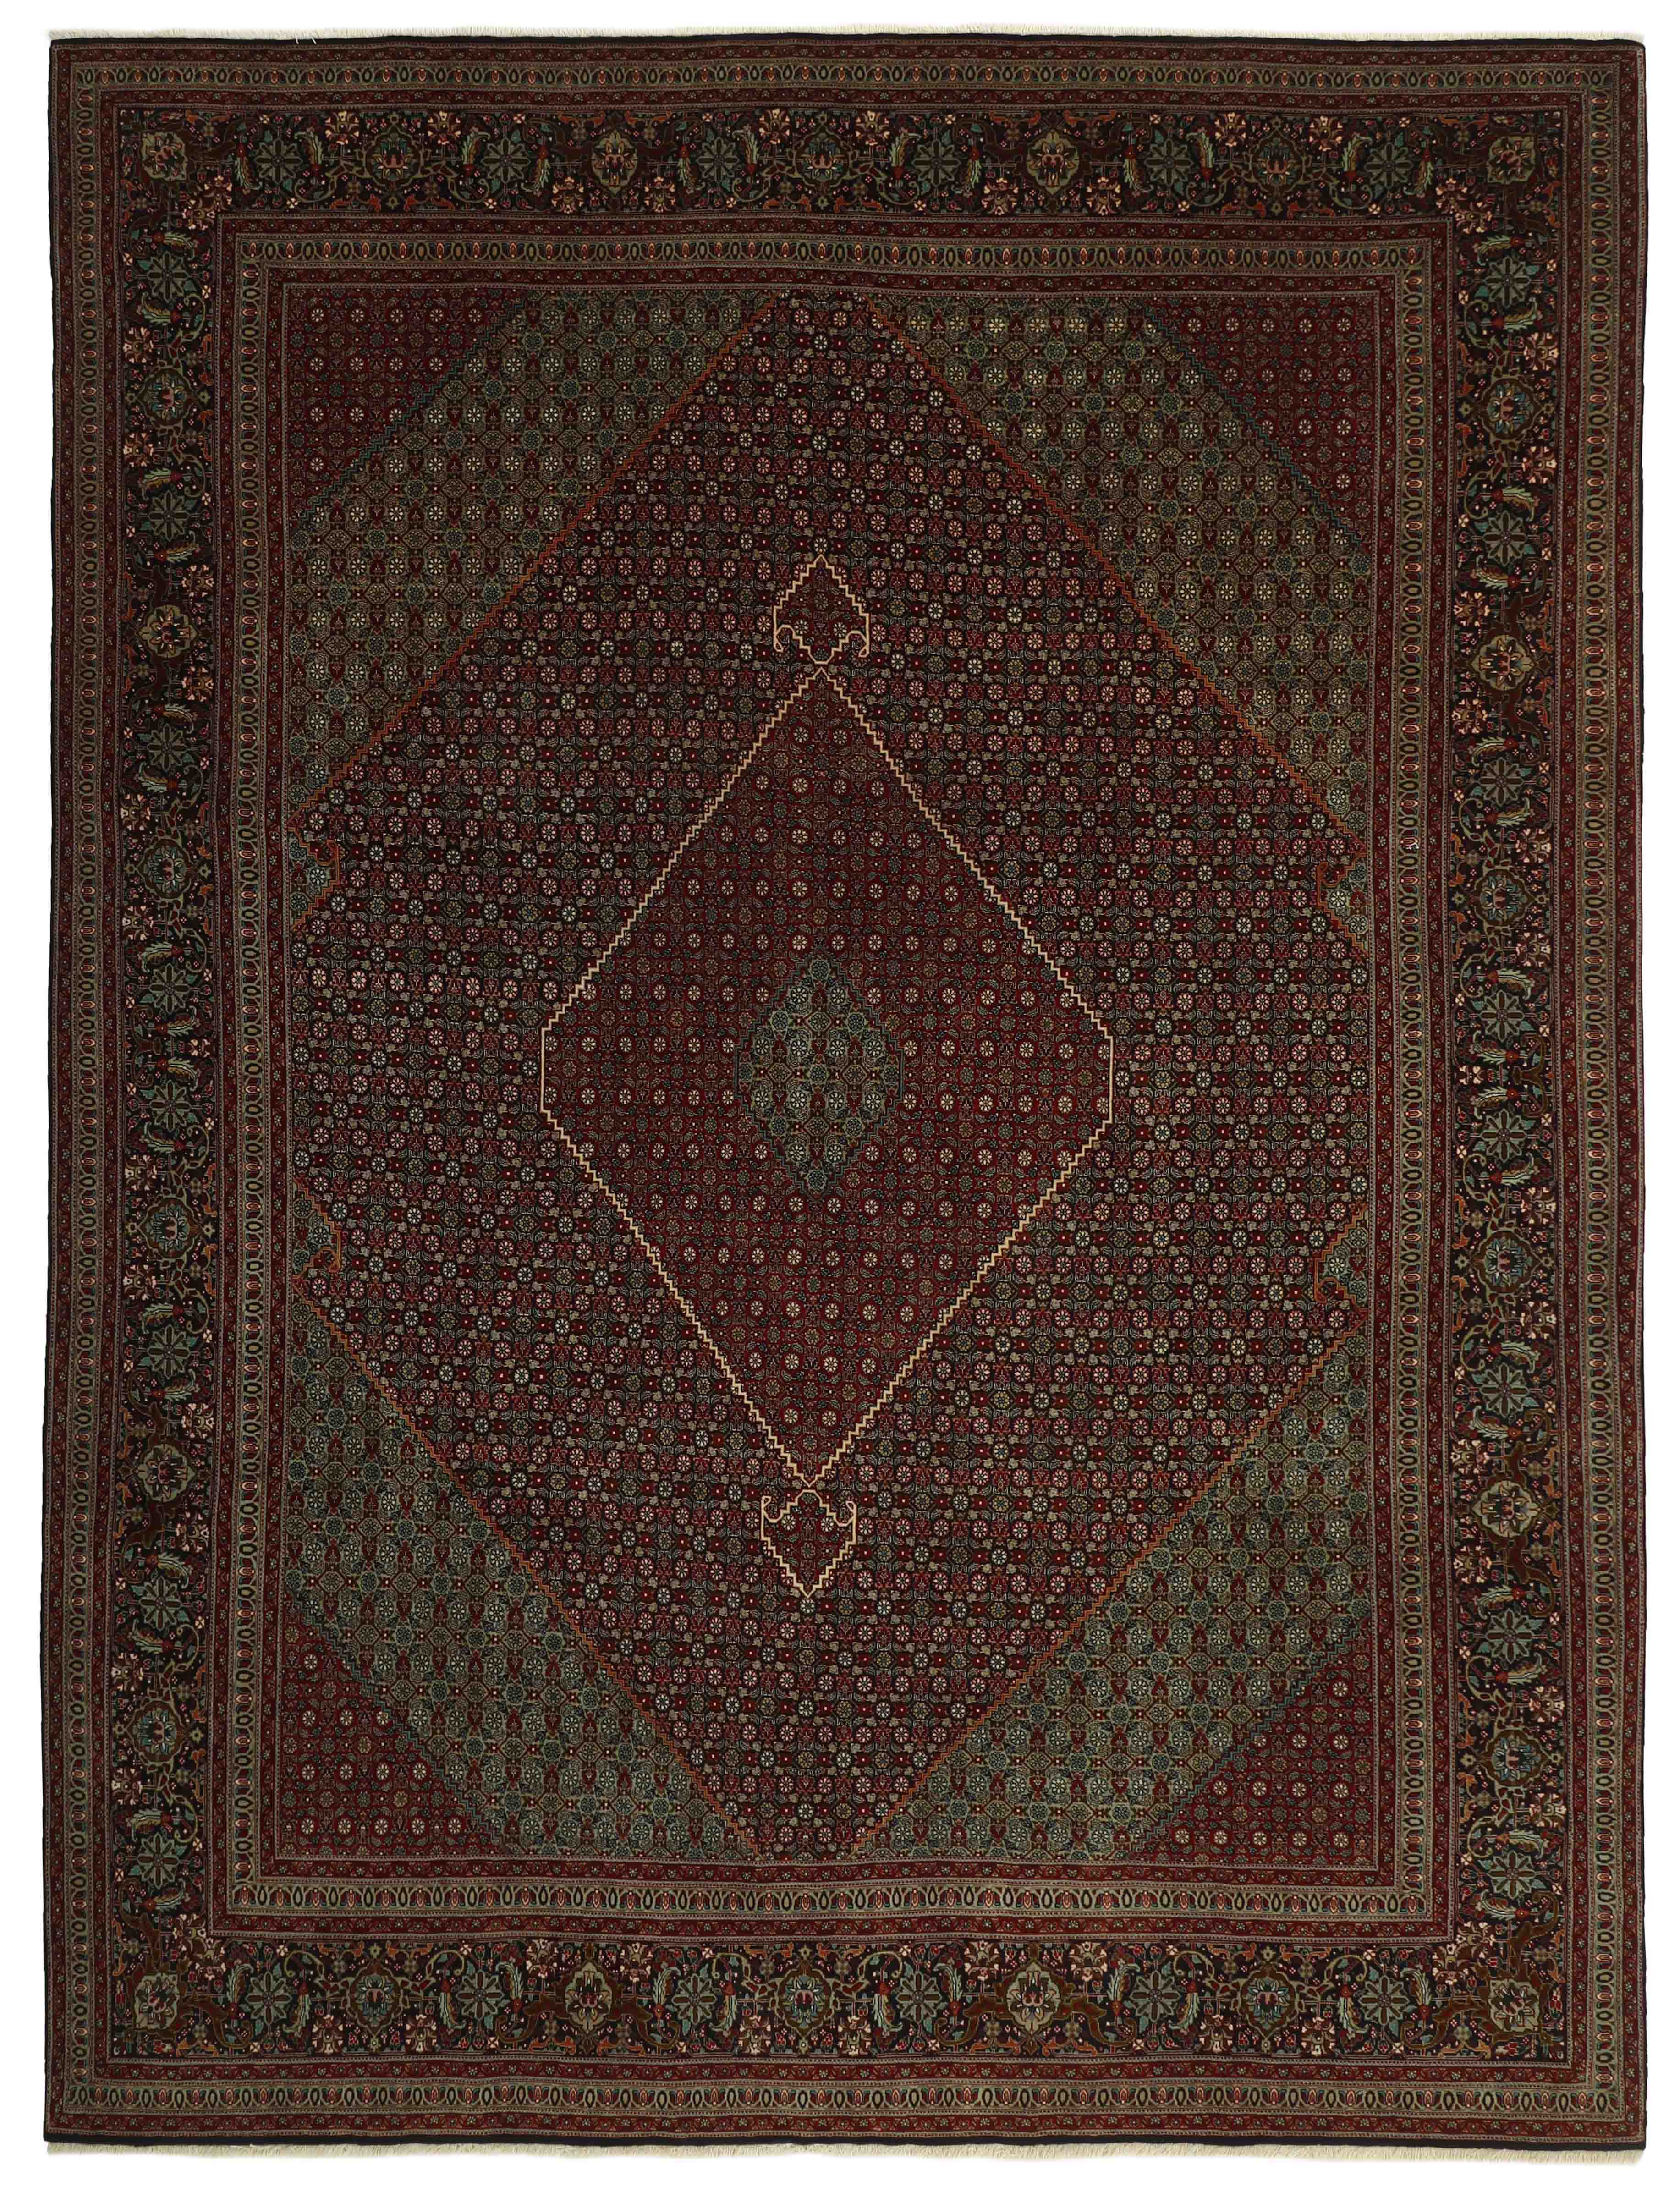 Authentic persian rug with traditional floral design in red, cream and beige